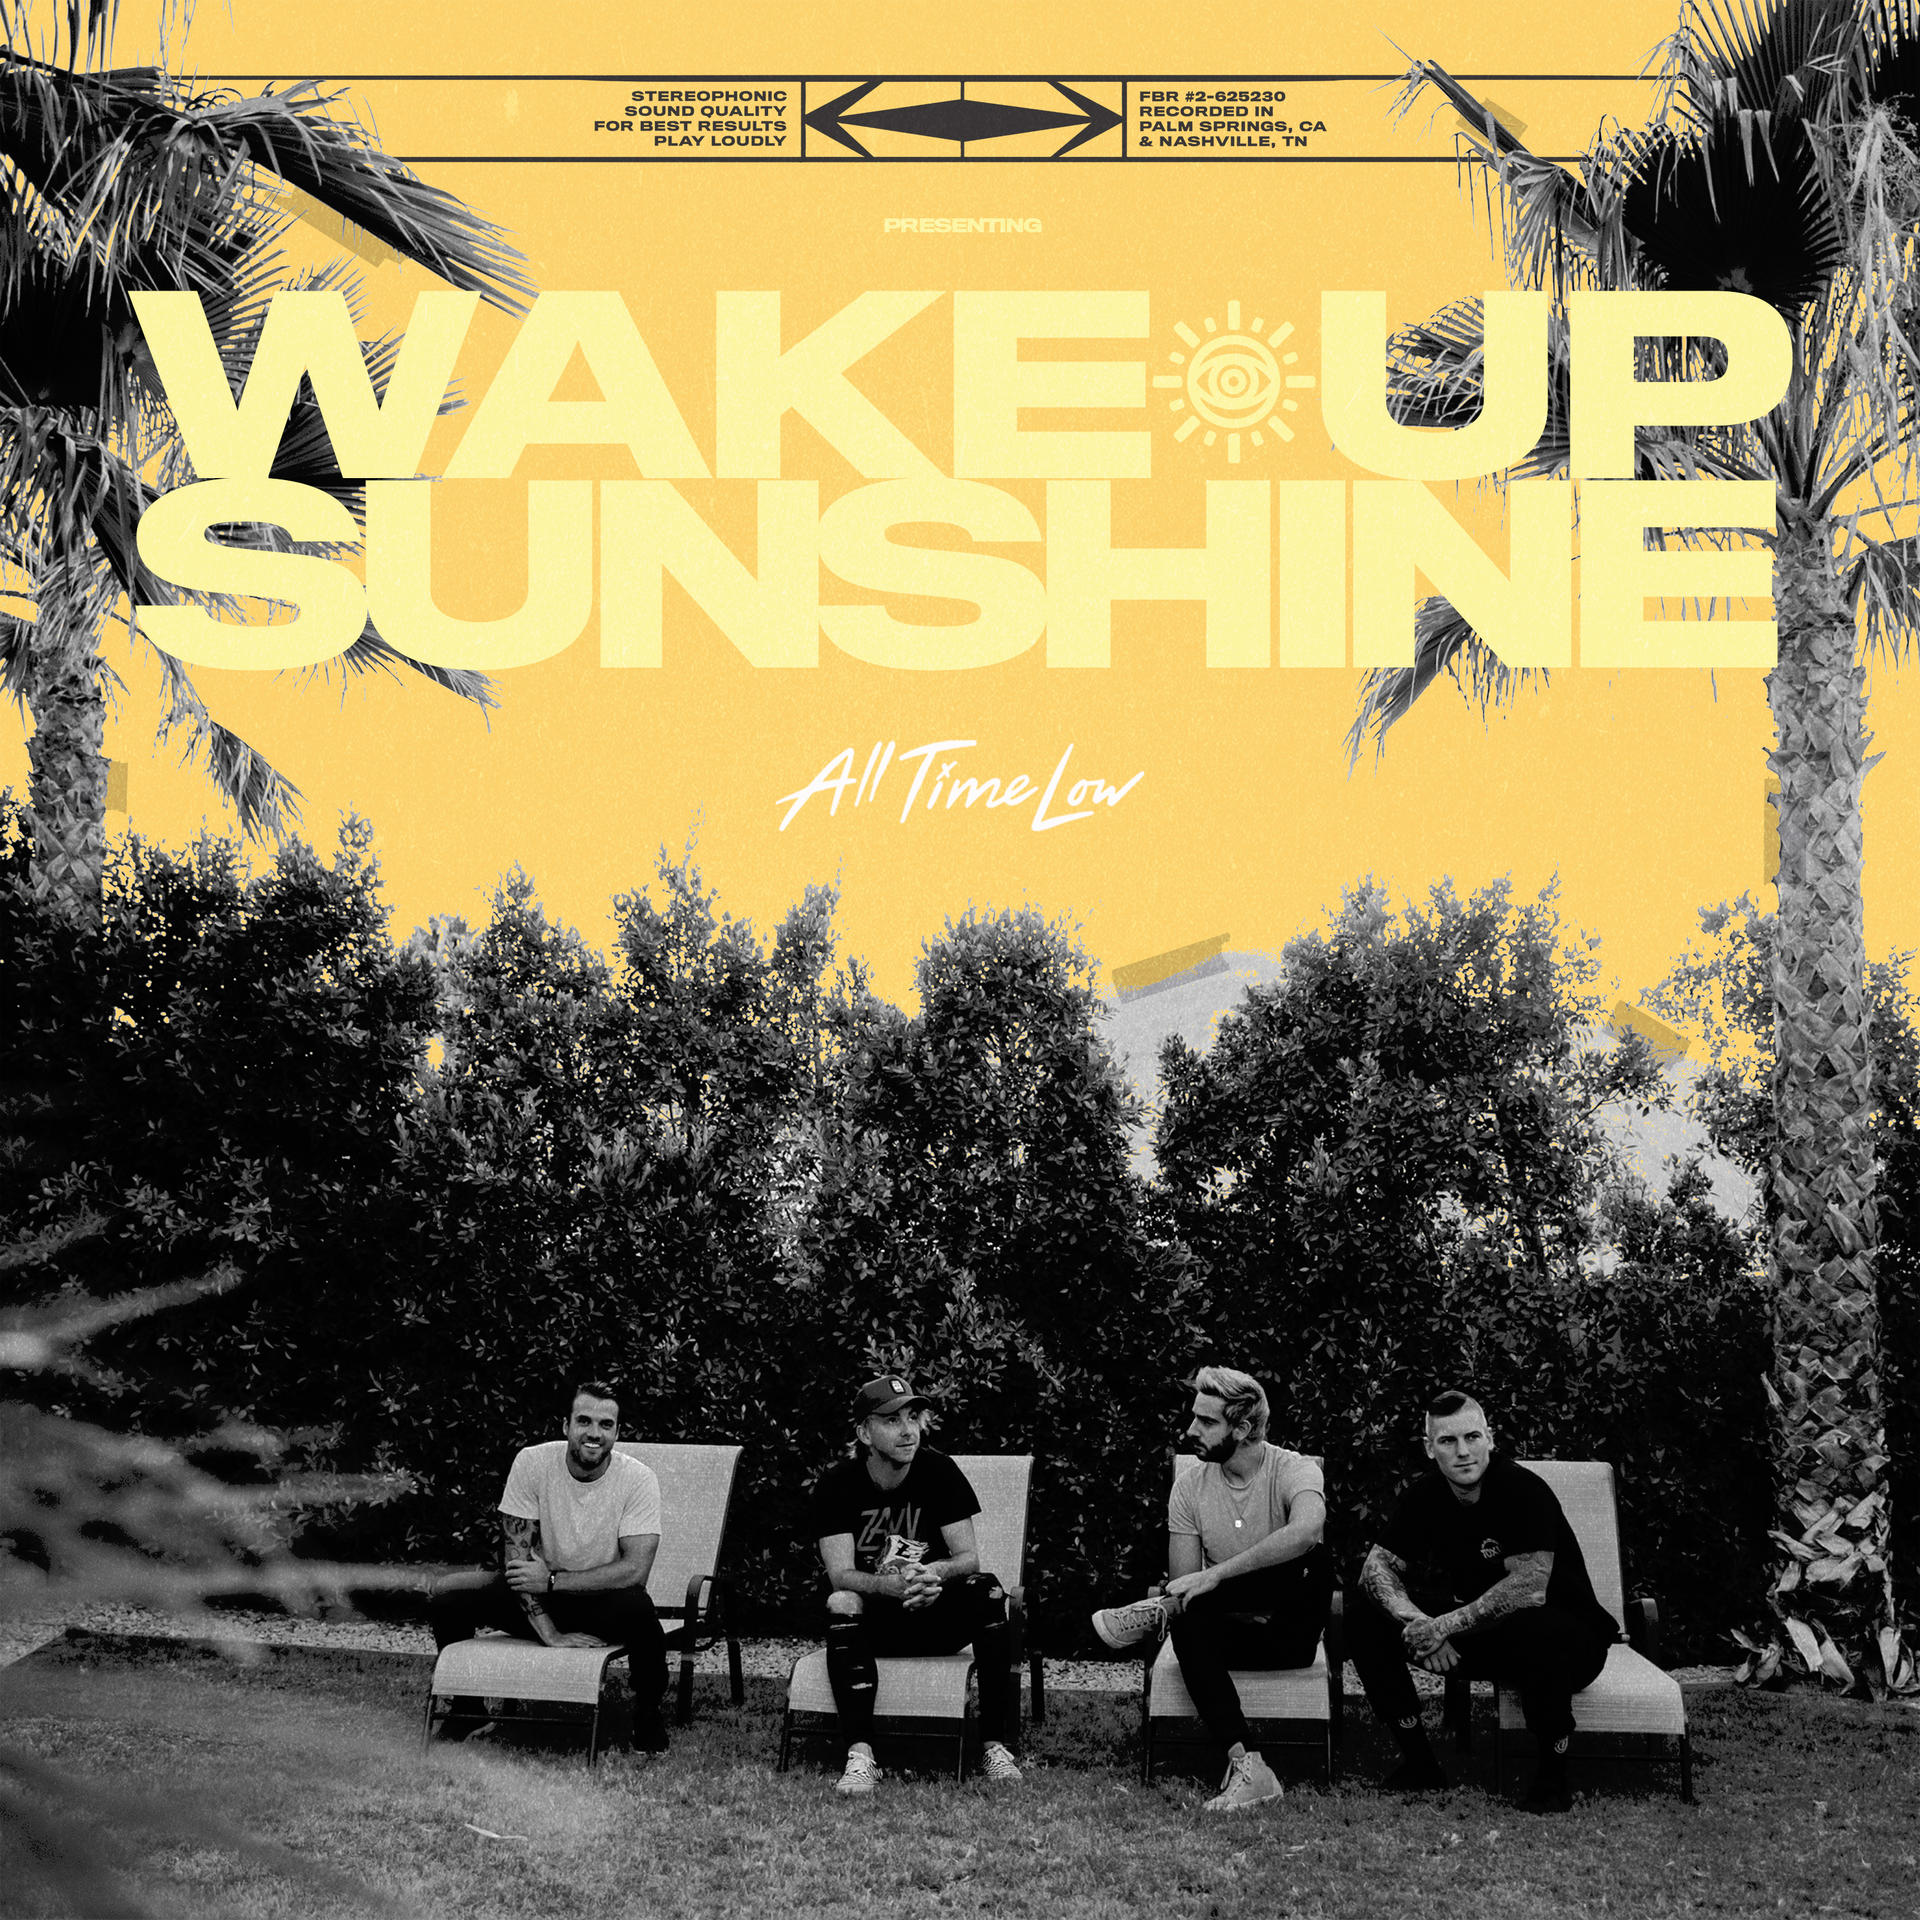 All Time Low - Wake Up,Sunshine (CD) 